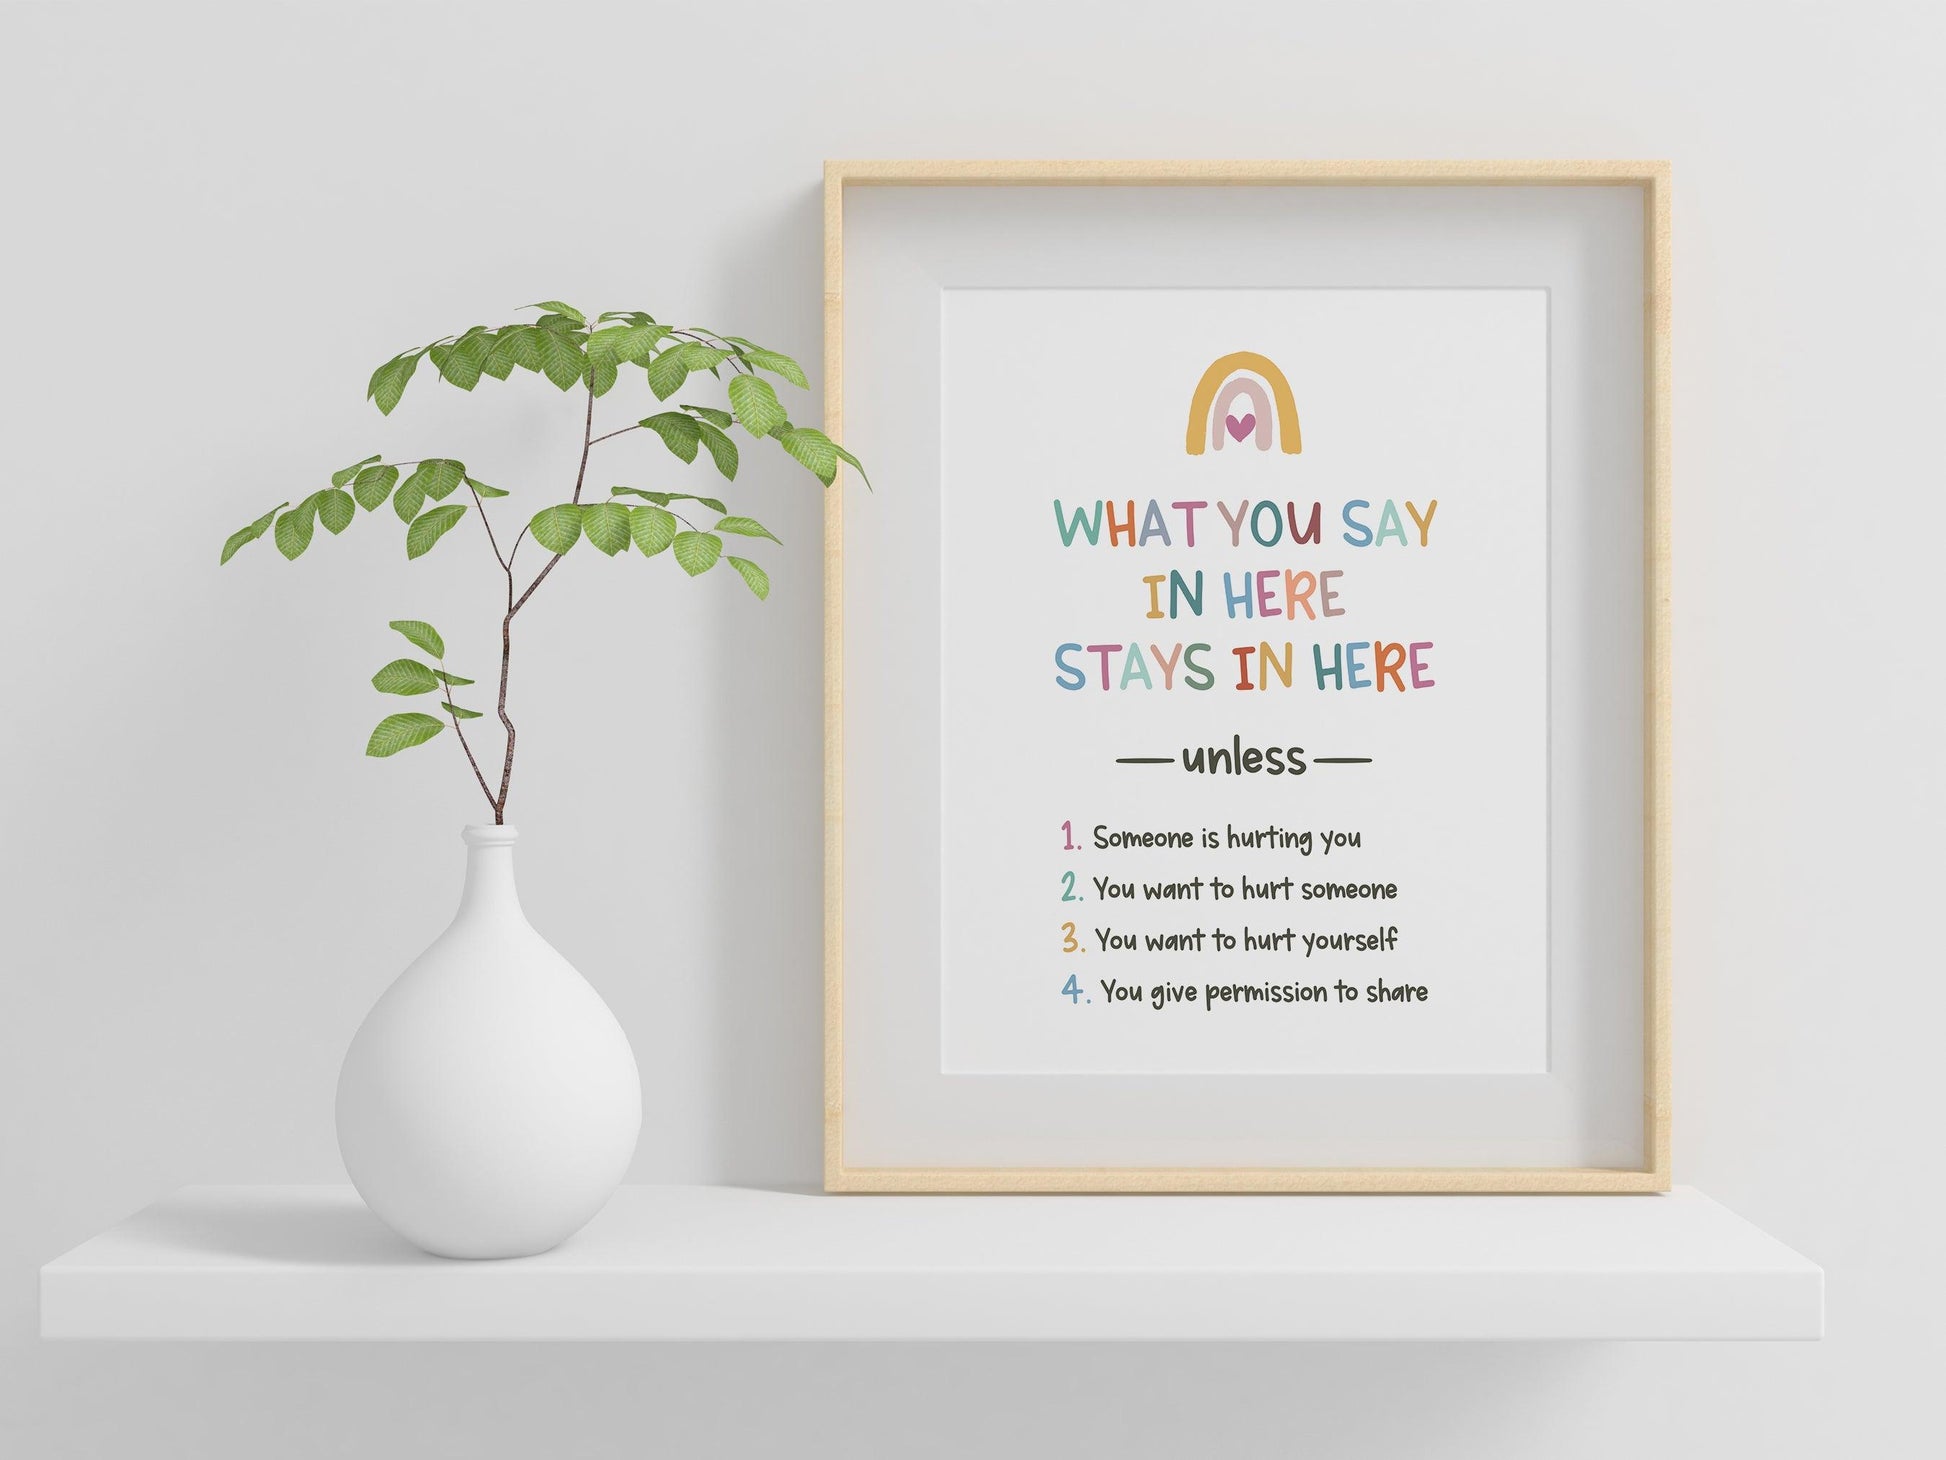 What You Say In Here Stays In Here Poster - Shine and Thrive Therapy